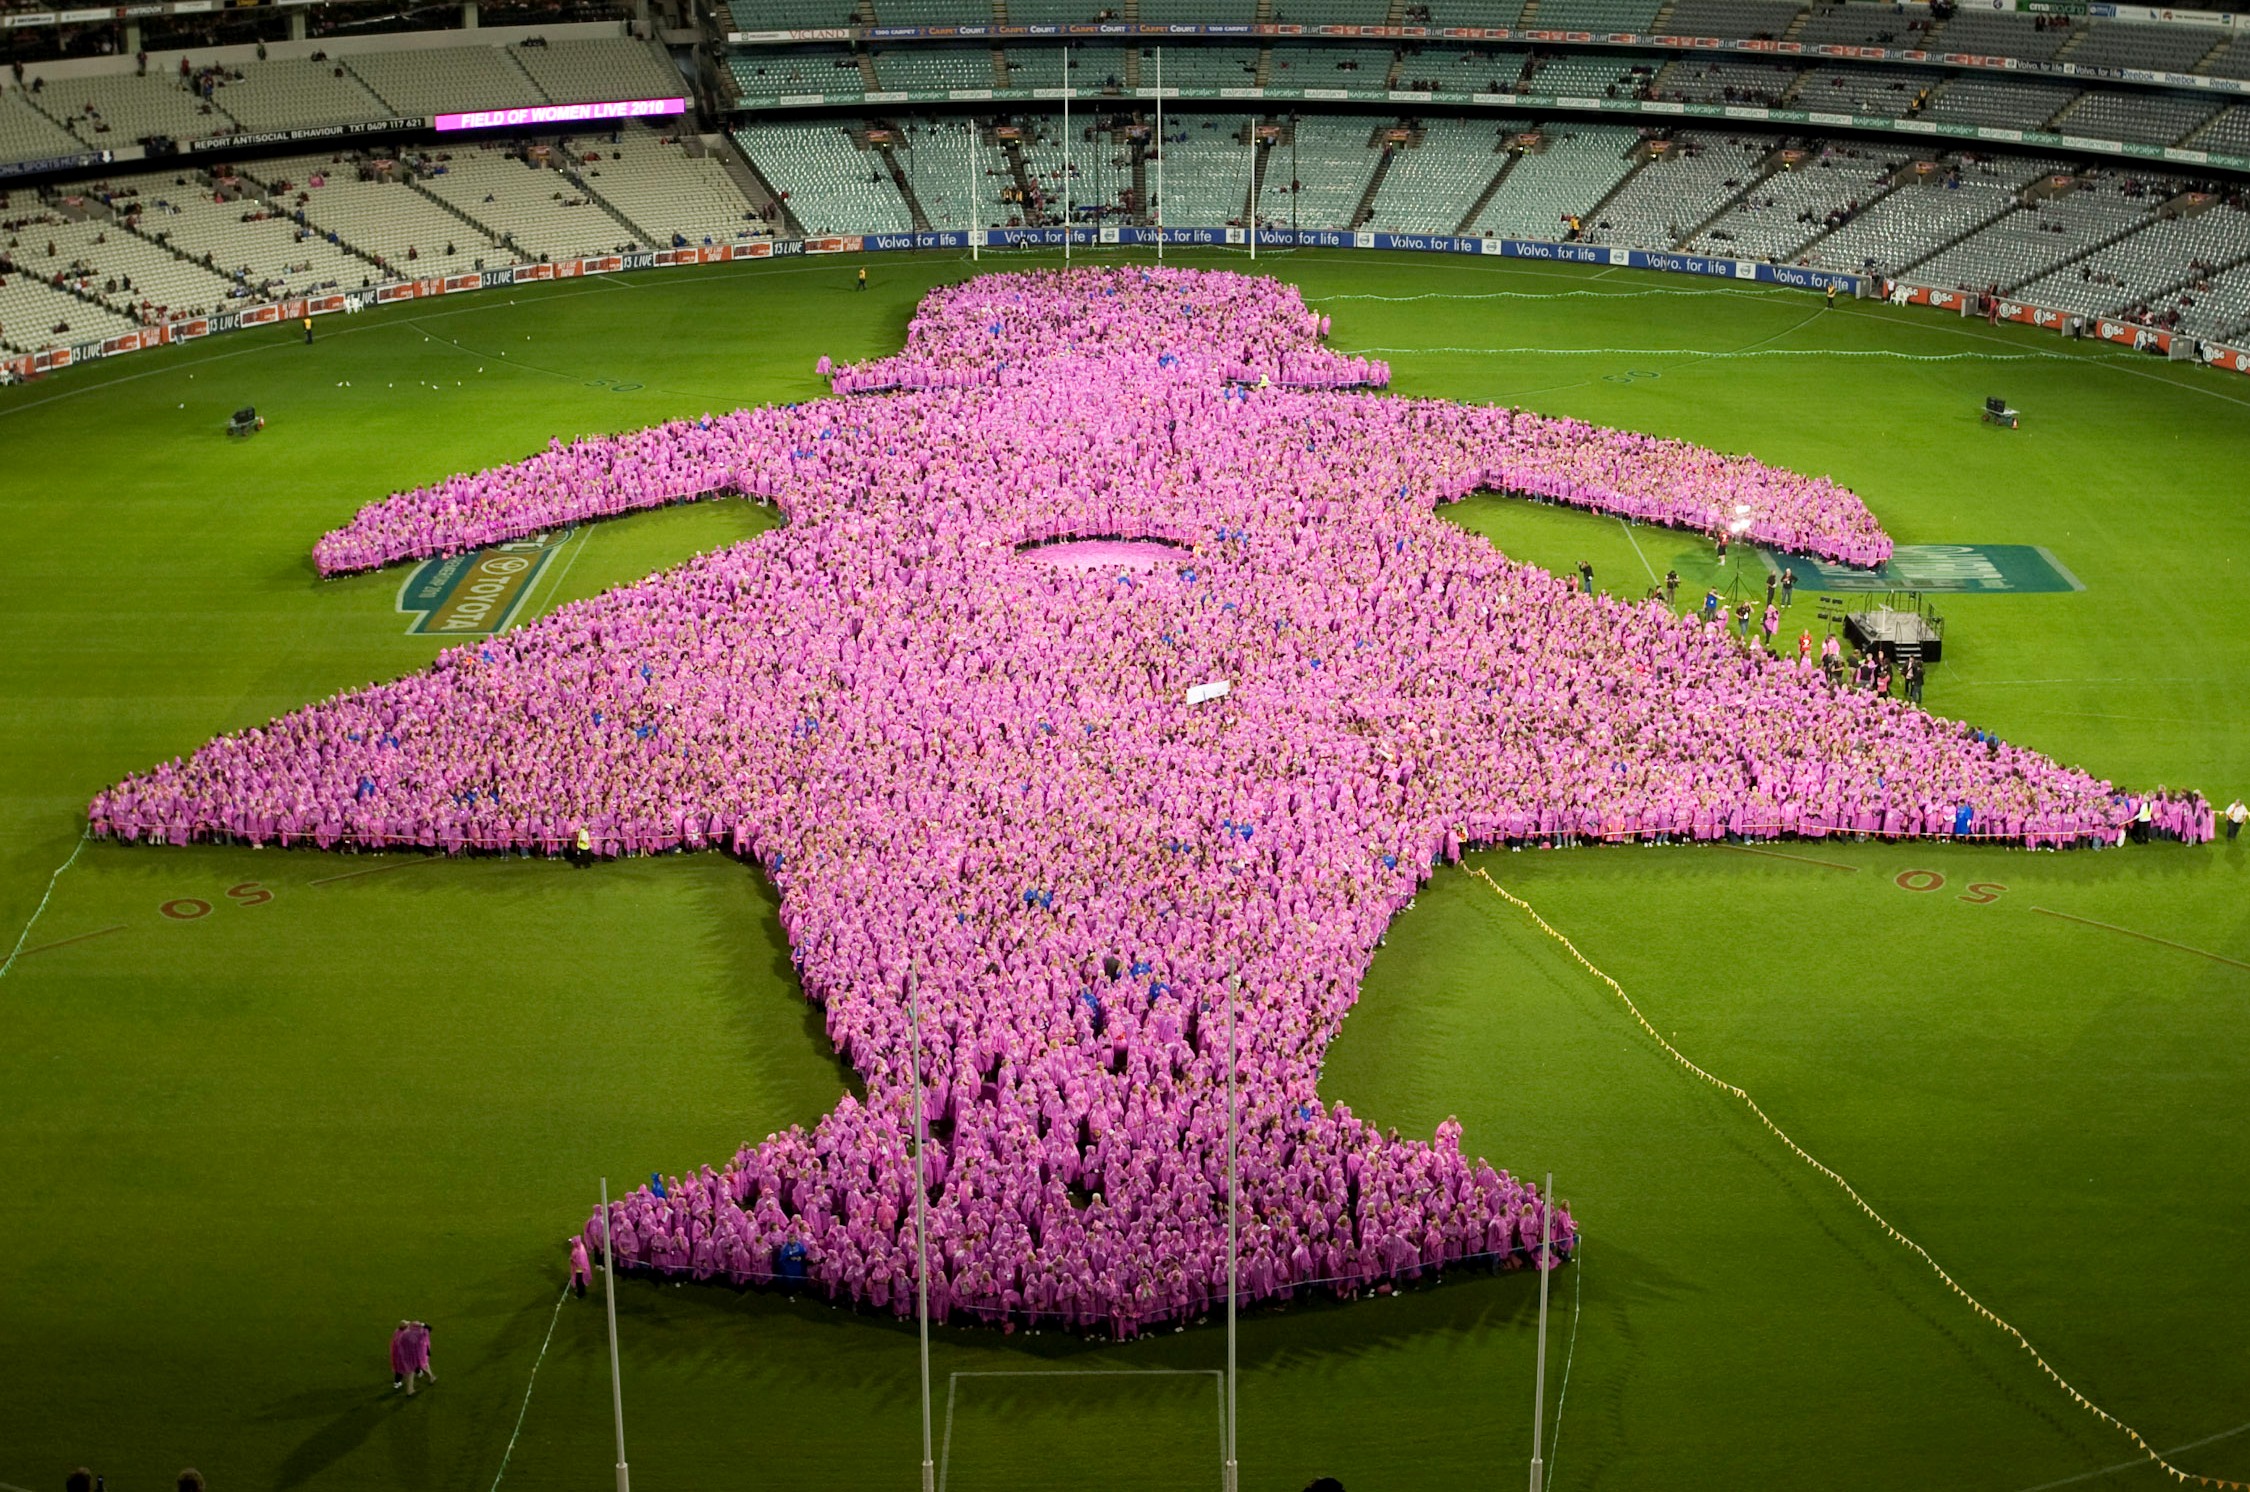 Field of Women for Breast Cancer awareness